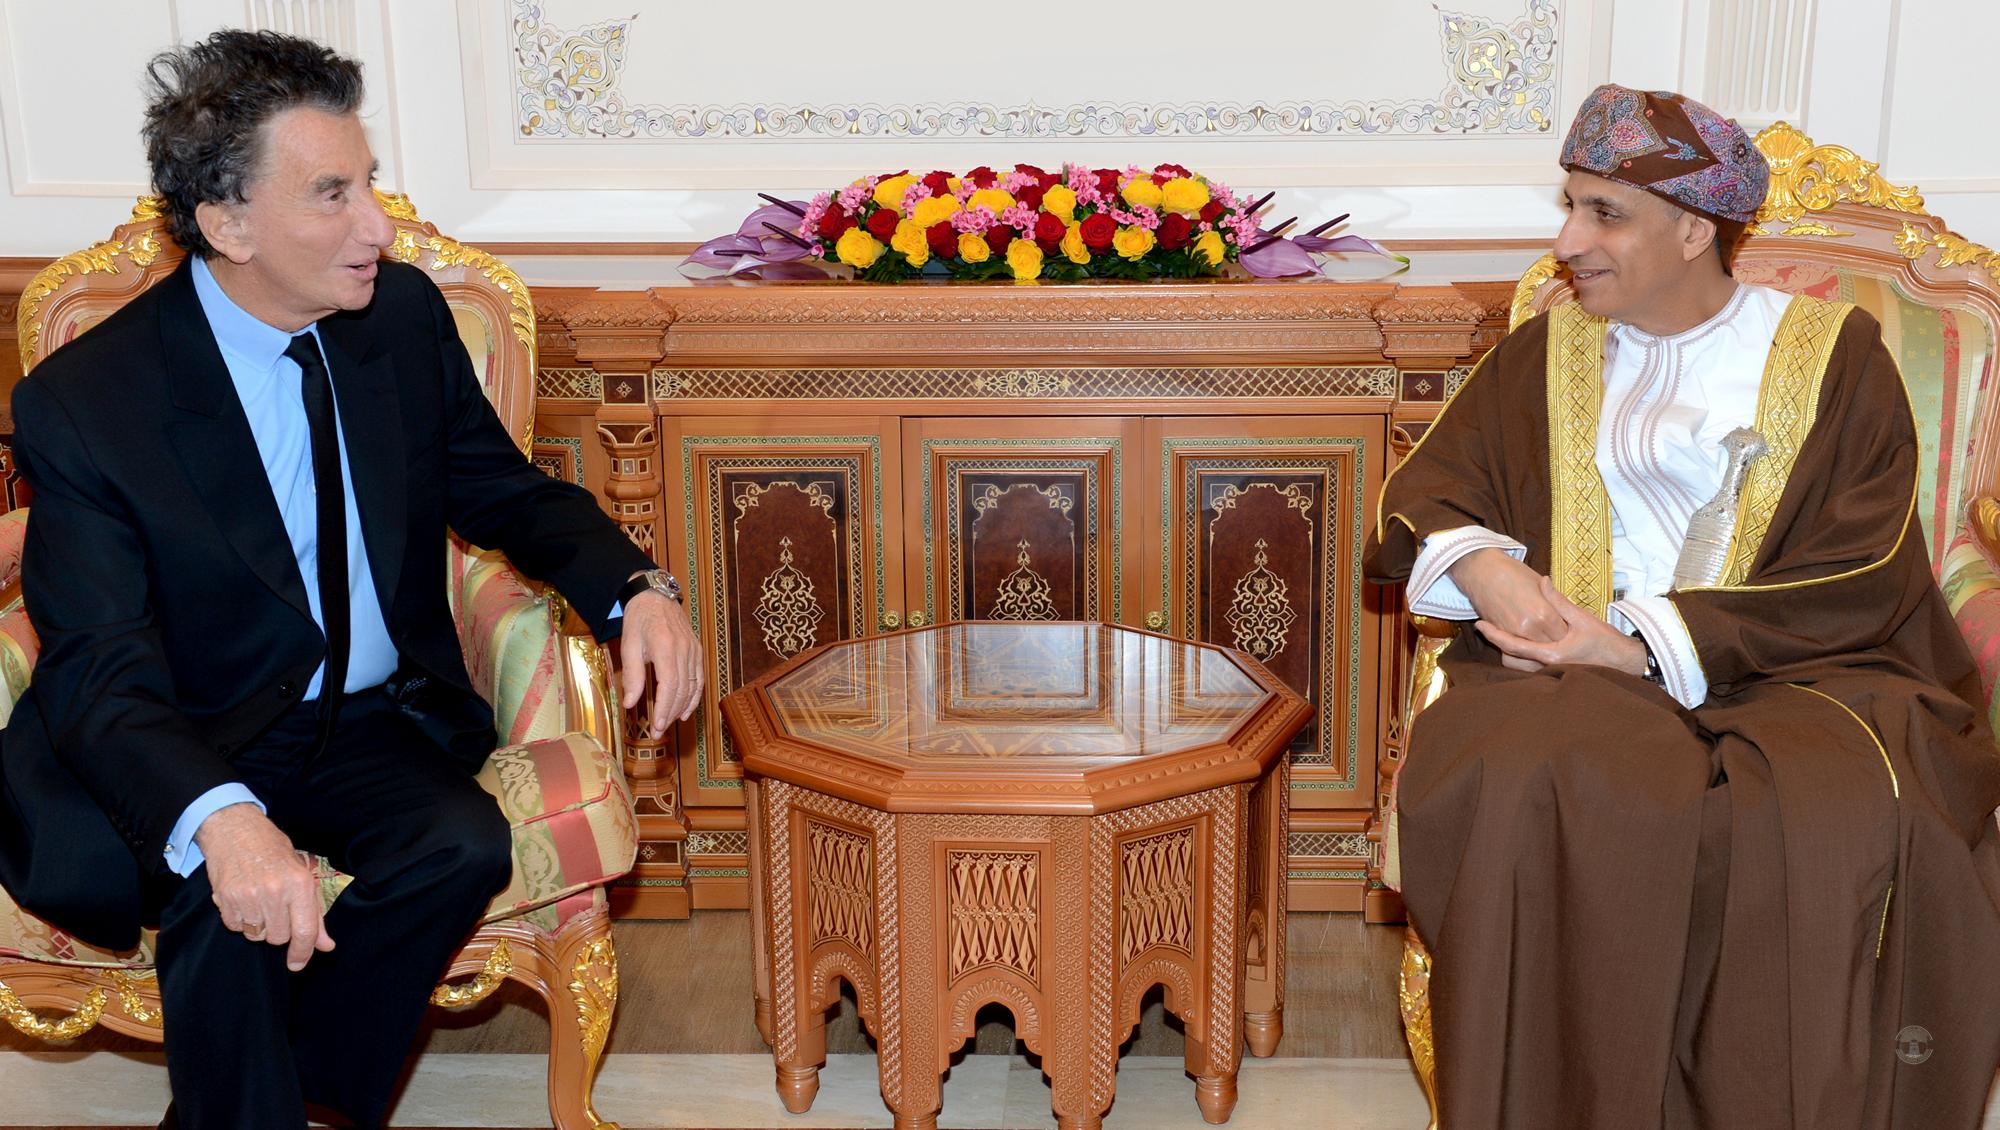 His Majesty Sultan Qaboos receives message from French president